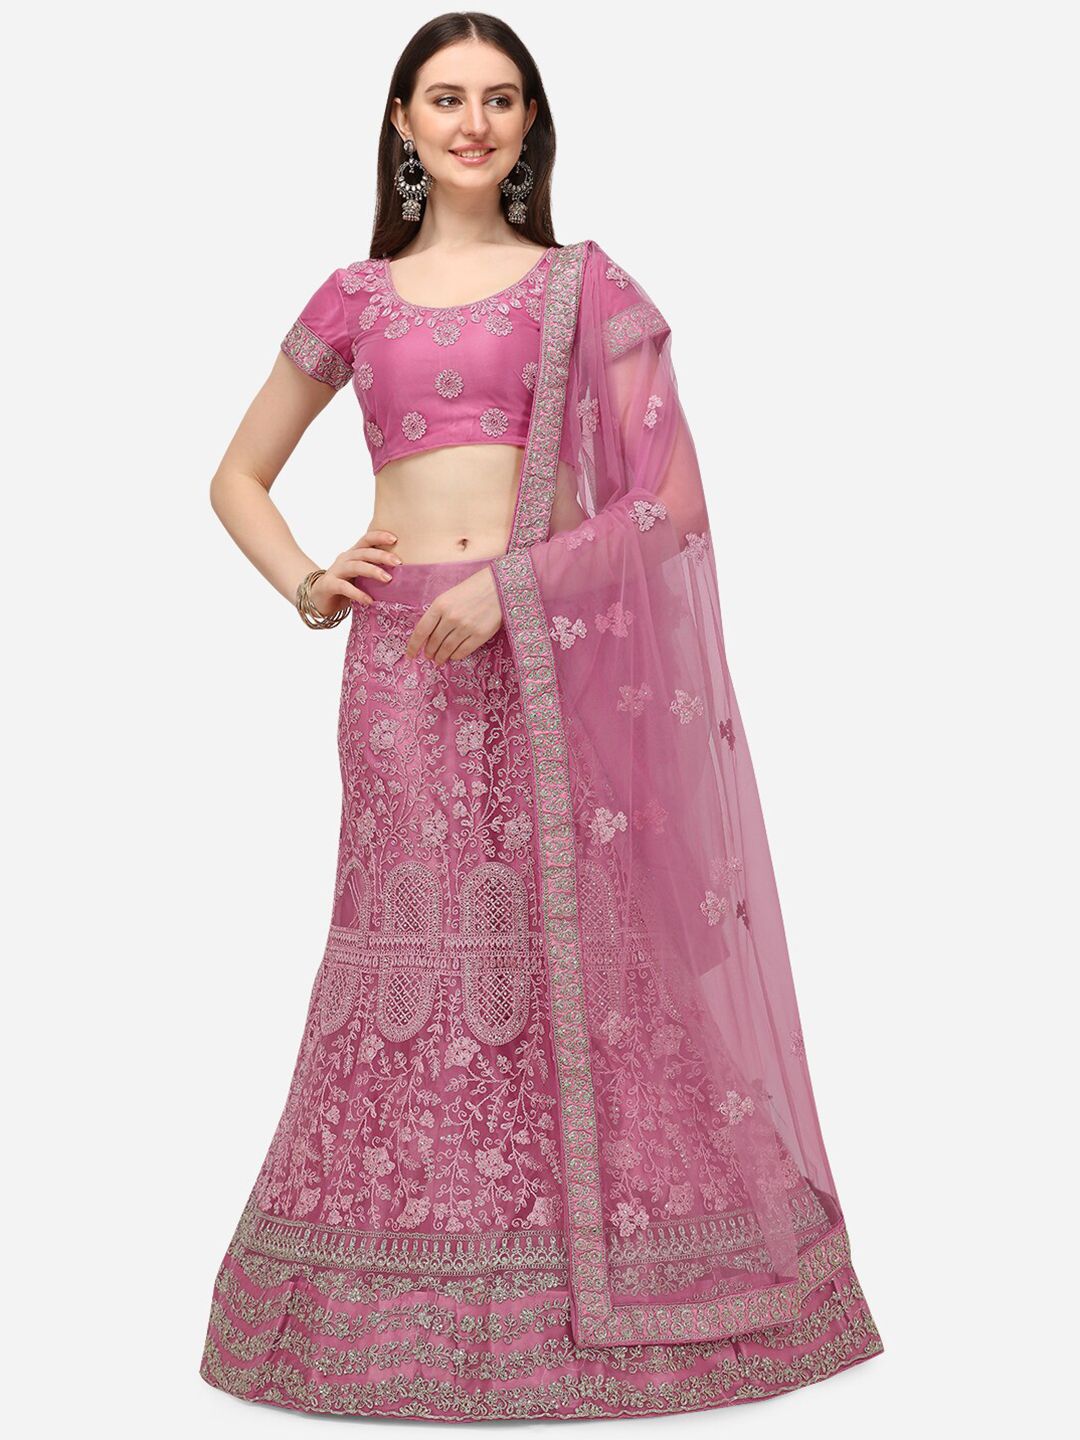 V SALES Pink & Silver-Toned Embroidered Thread Work Semi-Stitched Lehenga & Unstitched Blouse With Dupatta Price in India